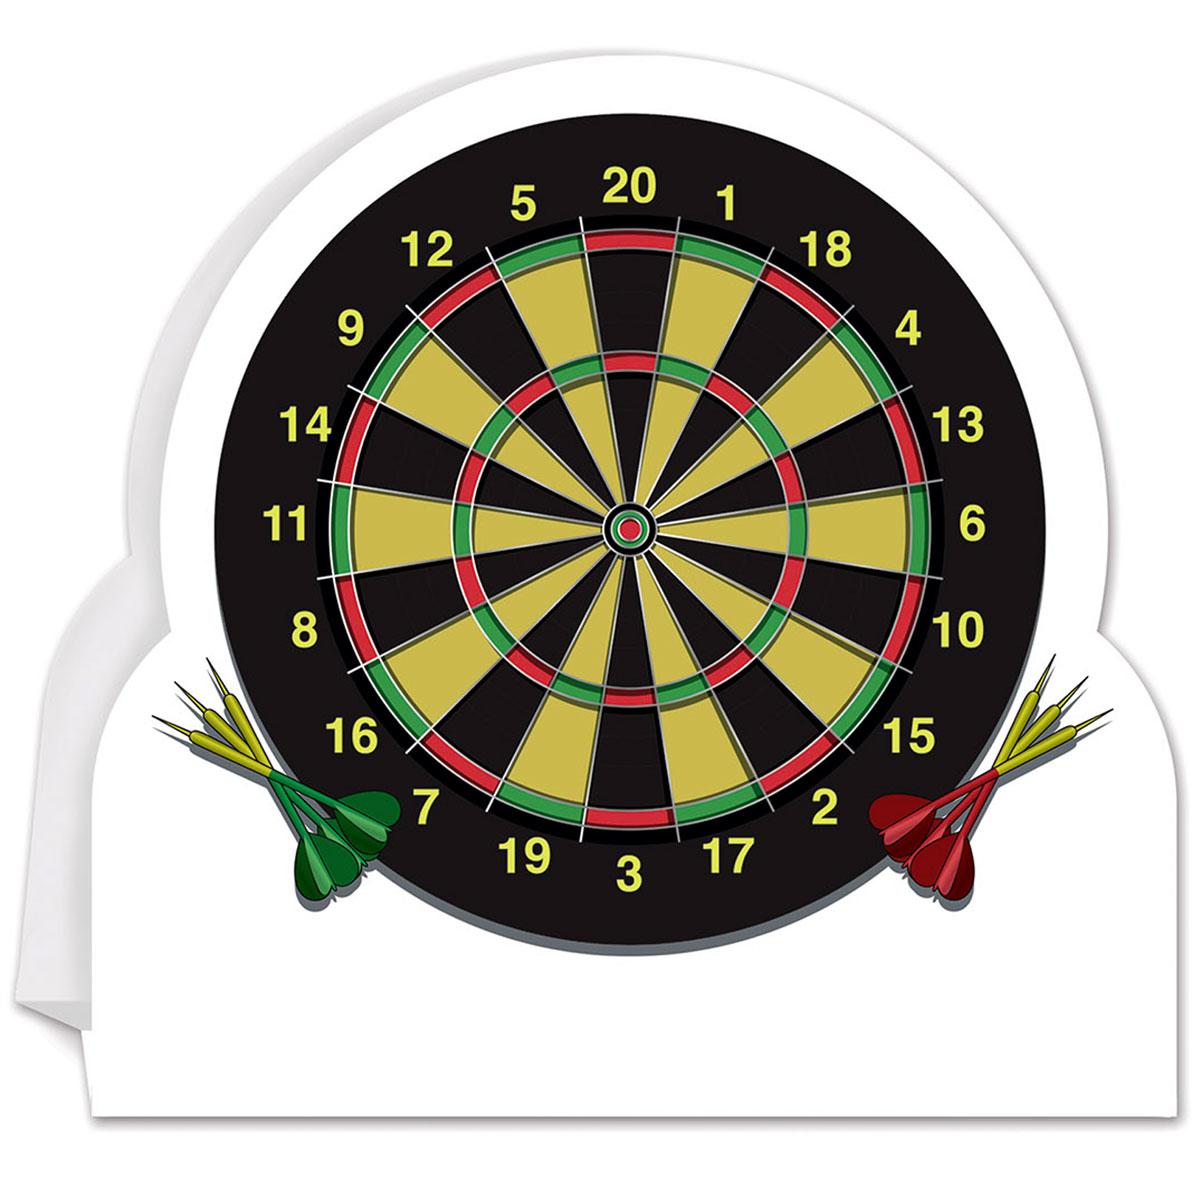 3D Dartboard Centerpiece 8.5" x 8.75" Darts Themed Tablecentre by Beistle 53751 available in the UK here at Karnival Costumes online party shop